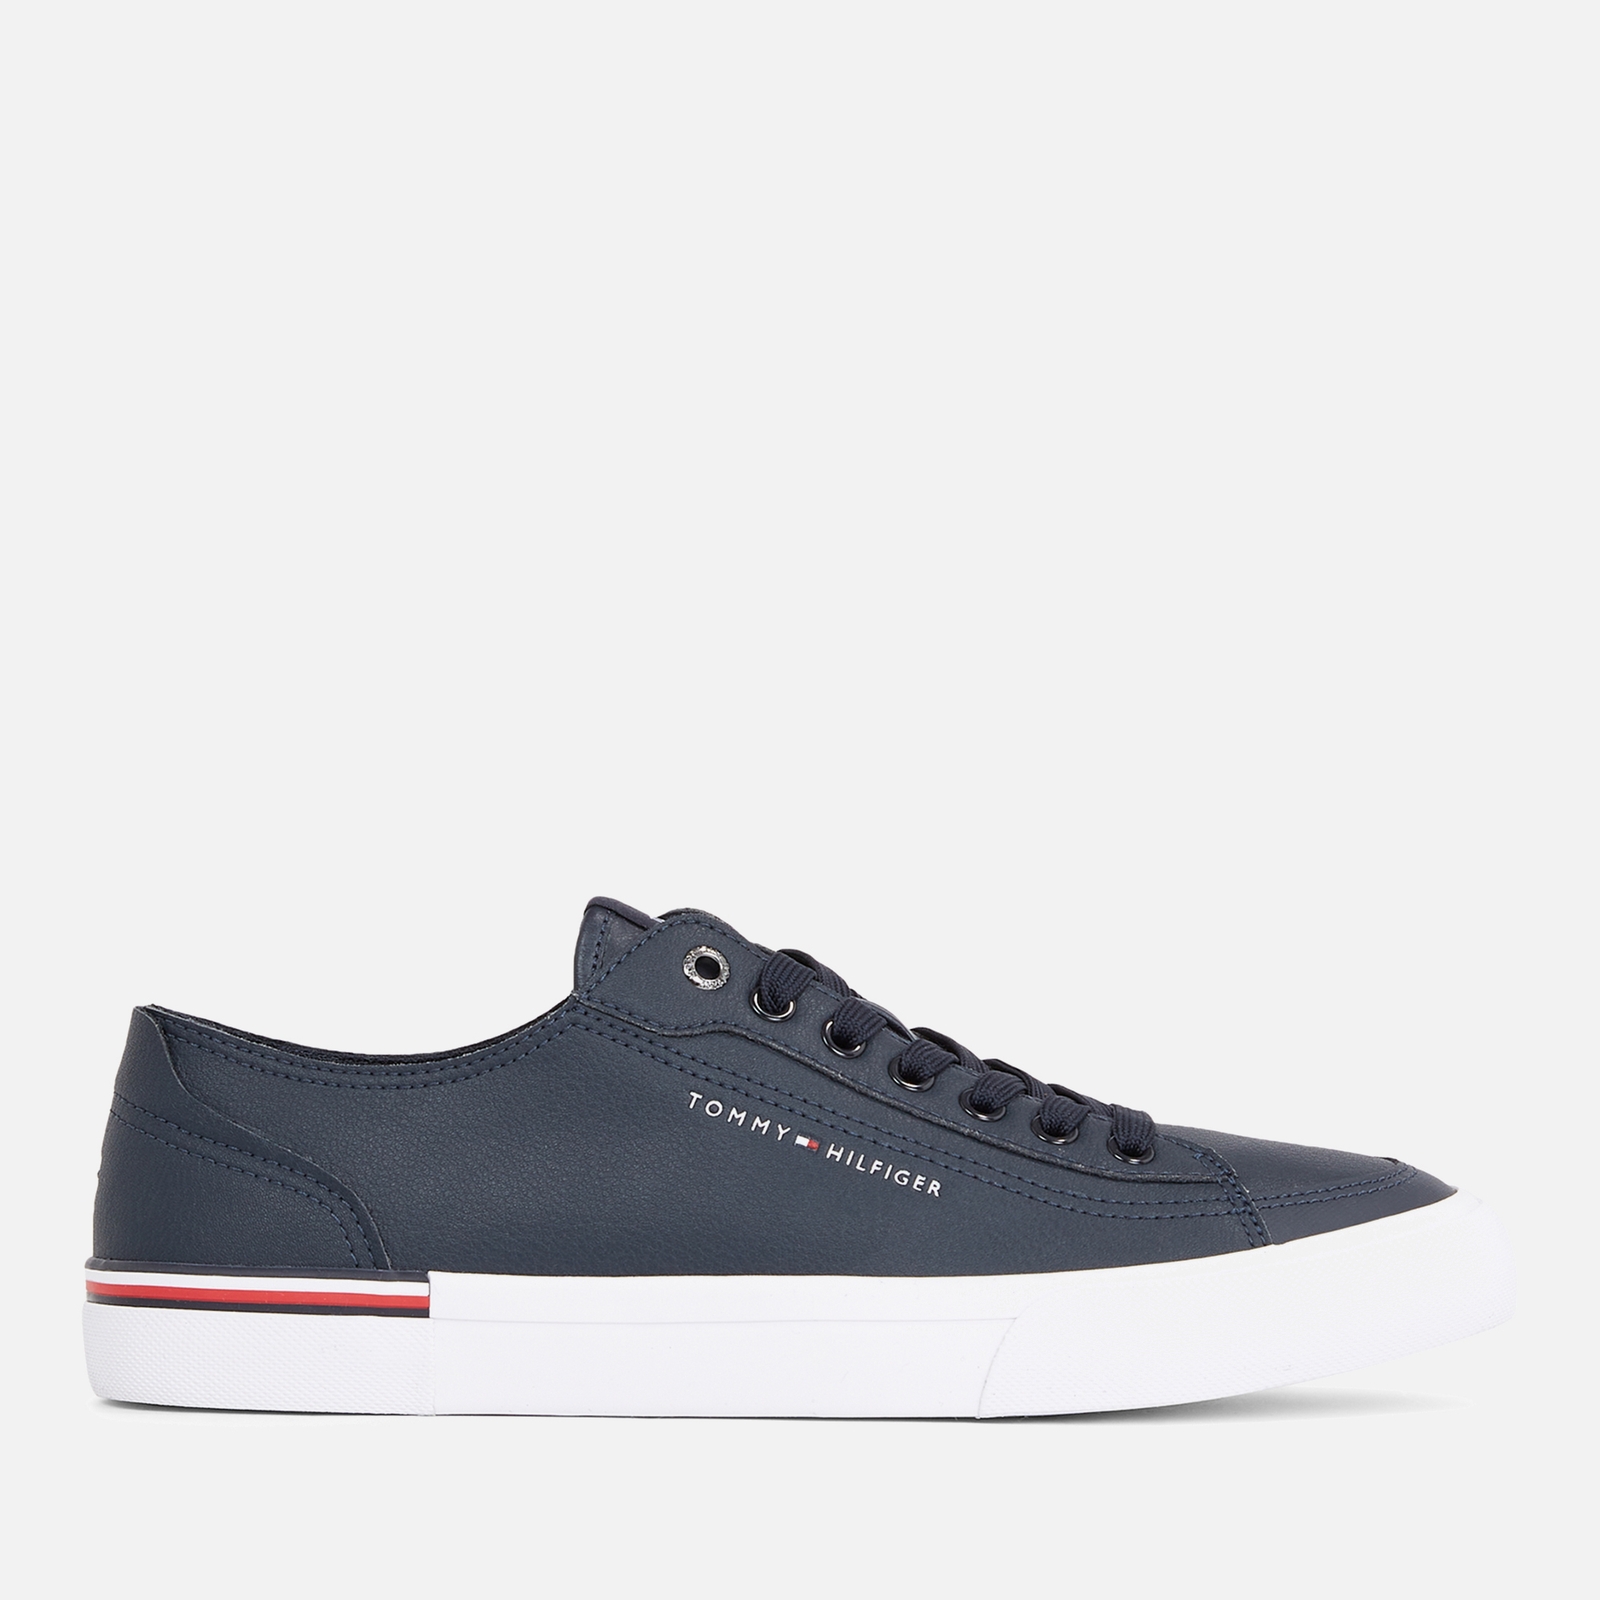 Tommy Hilfiger Men’s Vulcanized Leather and Faux Leather Trainers